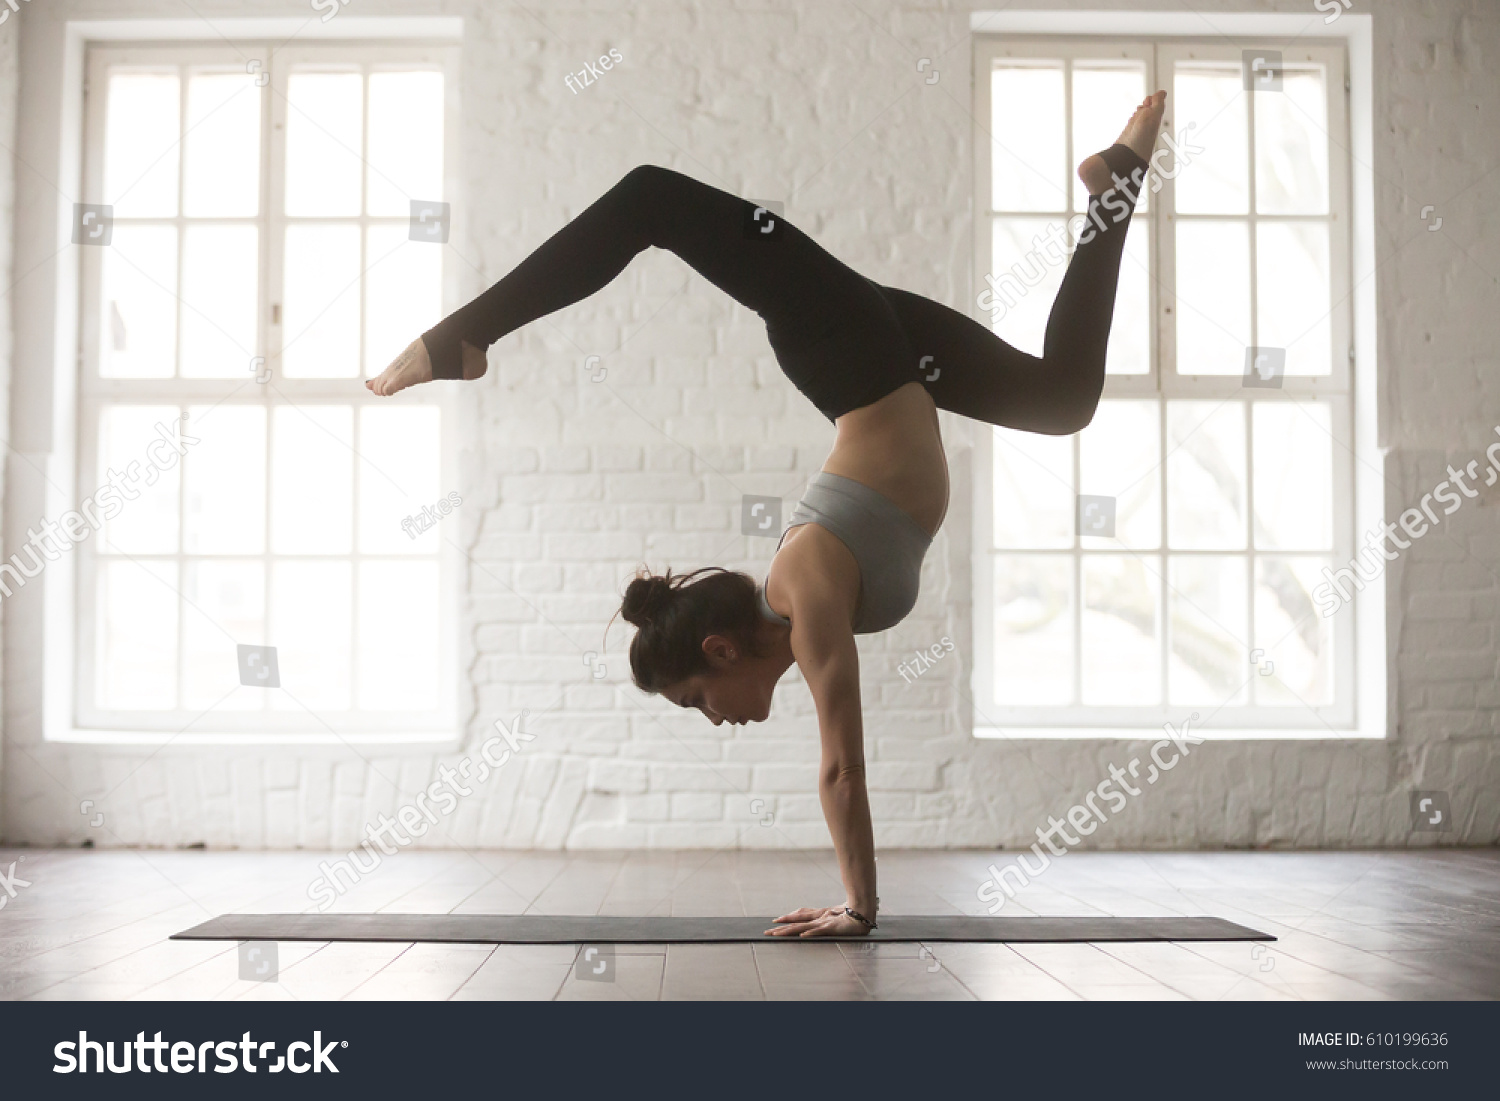 Silhouette of young cool attractive yogi woman practicing yoga concept, standing in Adho Mukha Vrksasana exercise, Downward facing Tree pose, working out, wearing sportswear bra and pants, full length #610199636